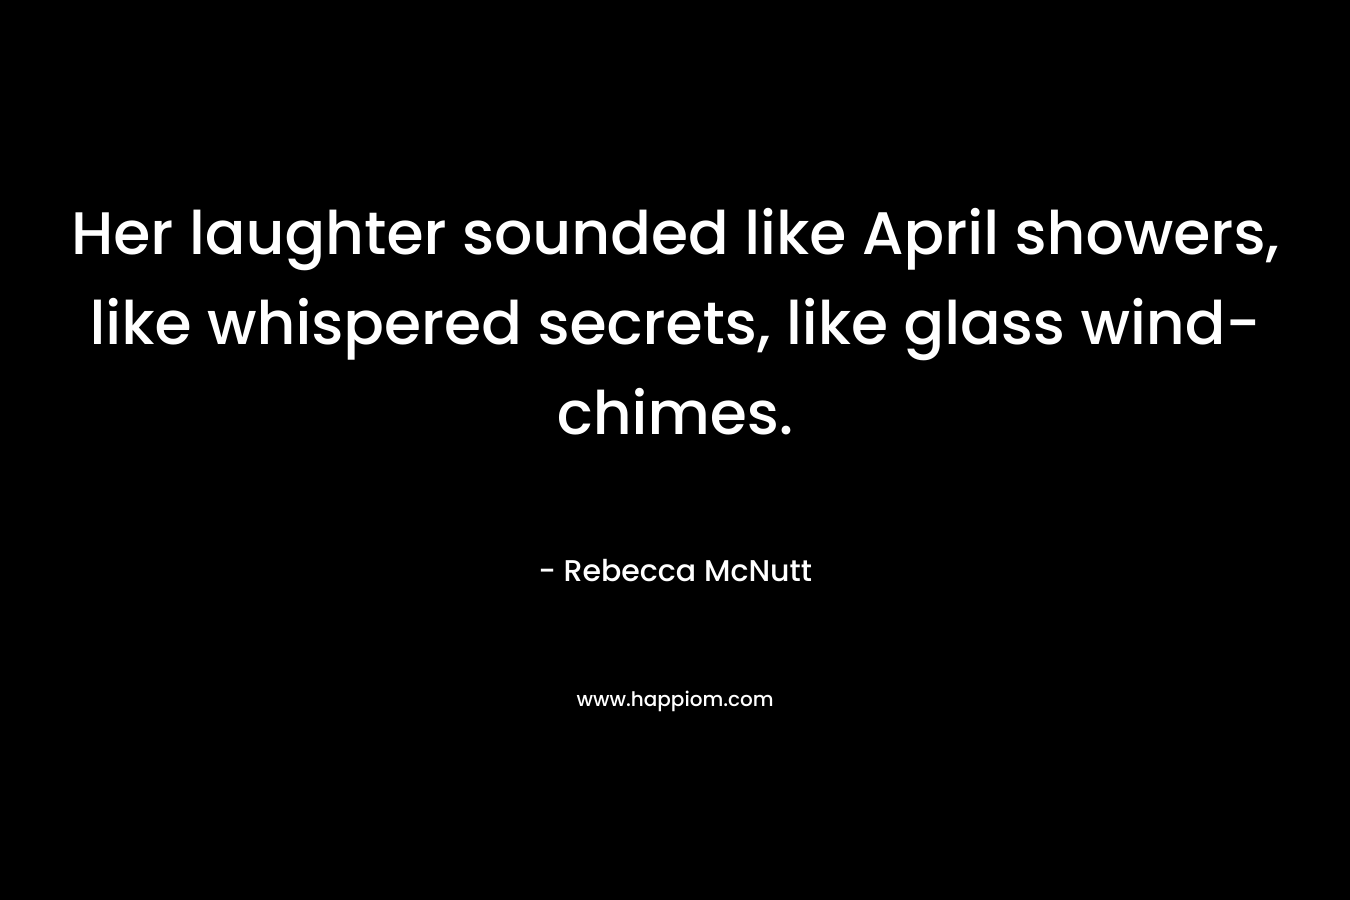 Her laughter sounded like April showers, like whispered secrets, like glass wind-chimes.